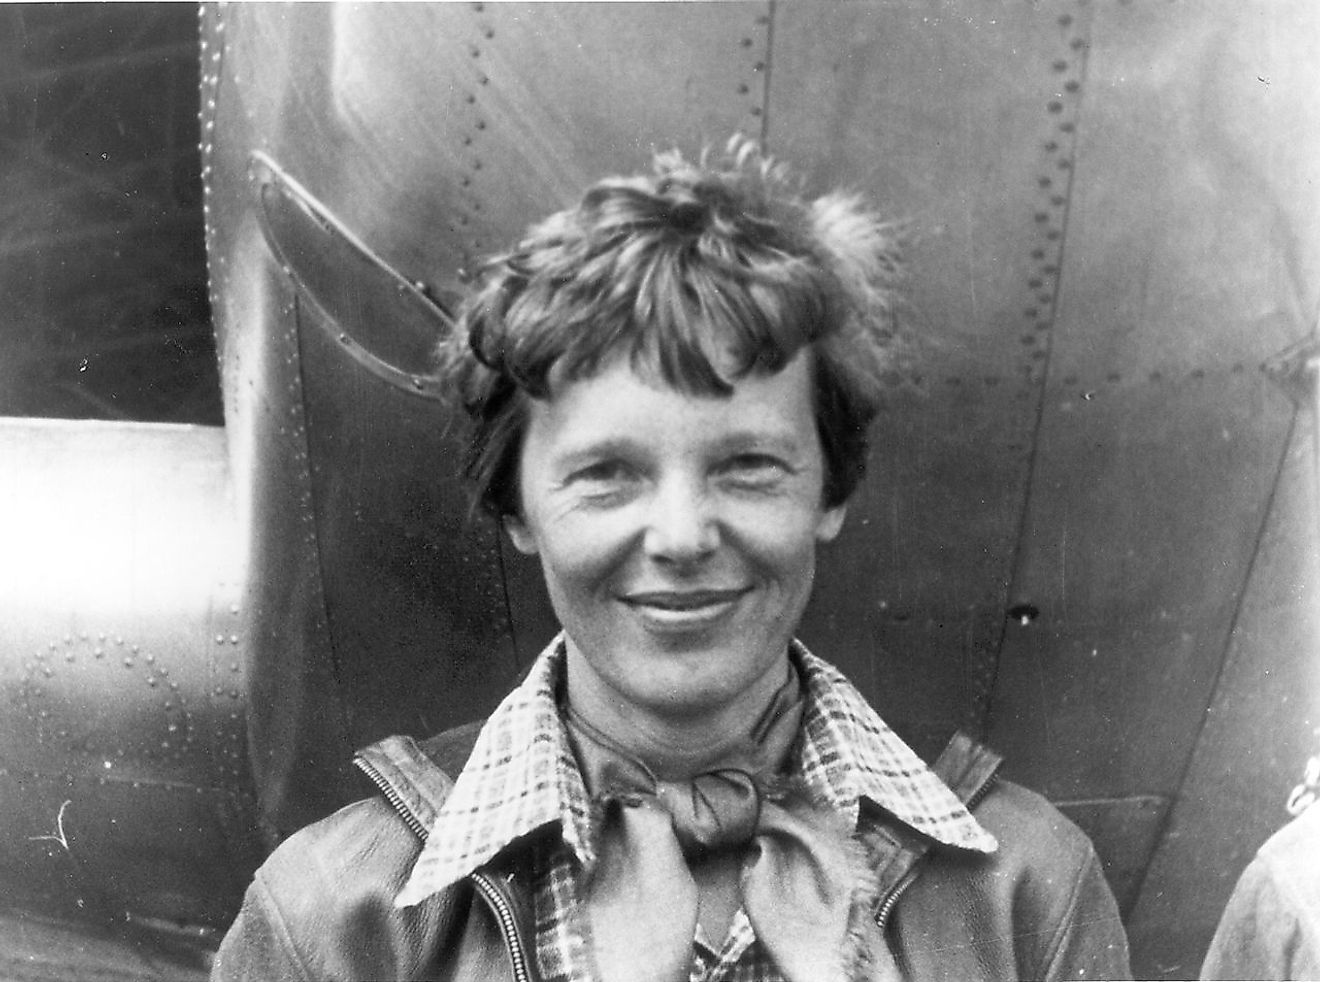 Amelia Earhart standing under nose of her Lockheed Model 10-E Electra. Gelatin silver print, 1937.